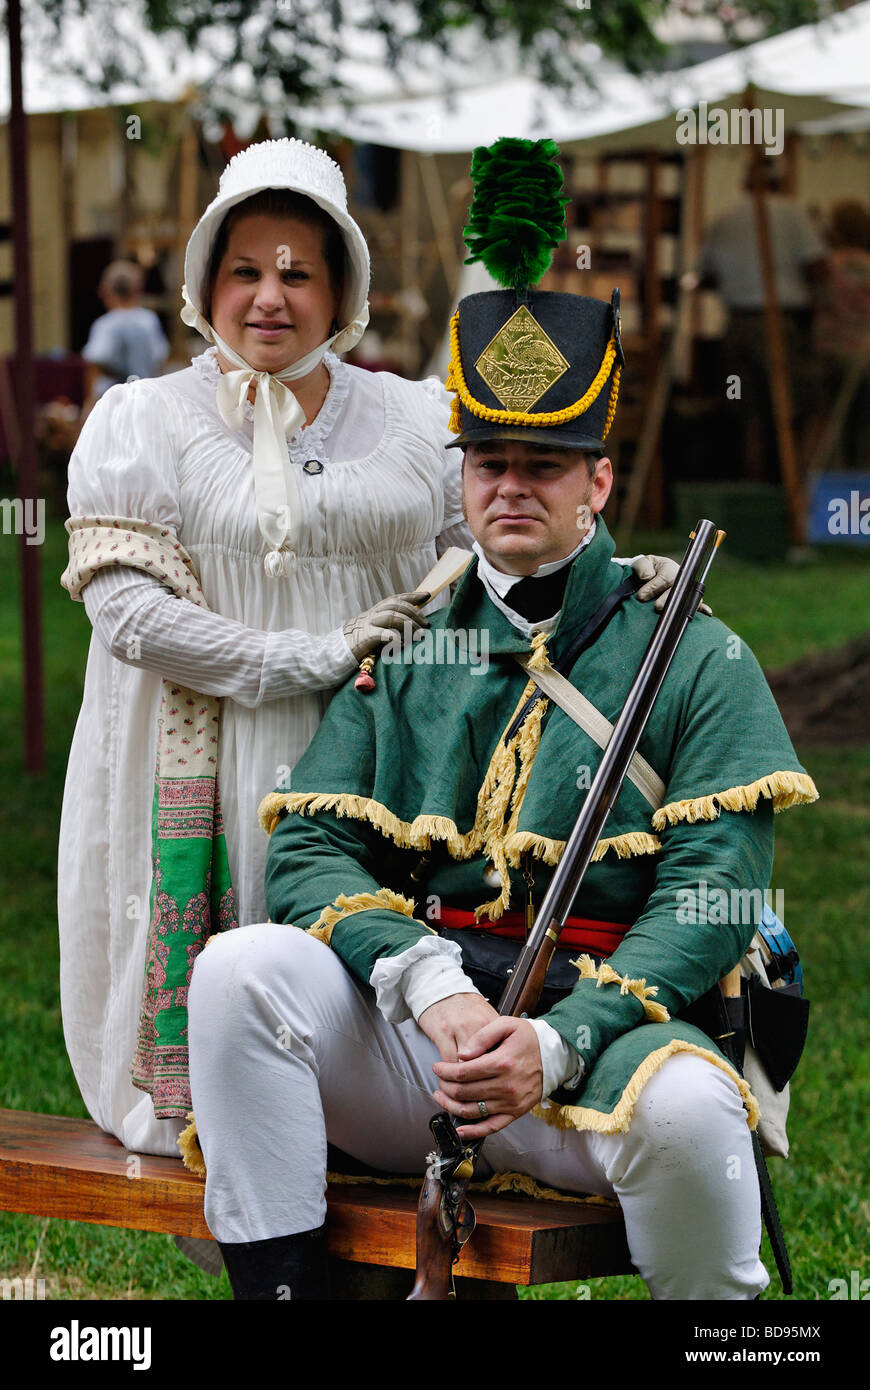 Couple in Early Nineteenth Century Costume Sitting at Encampment at Reenactment in Corydon Indiana Stock Photo